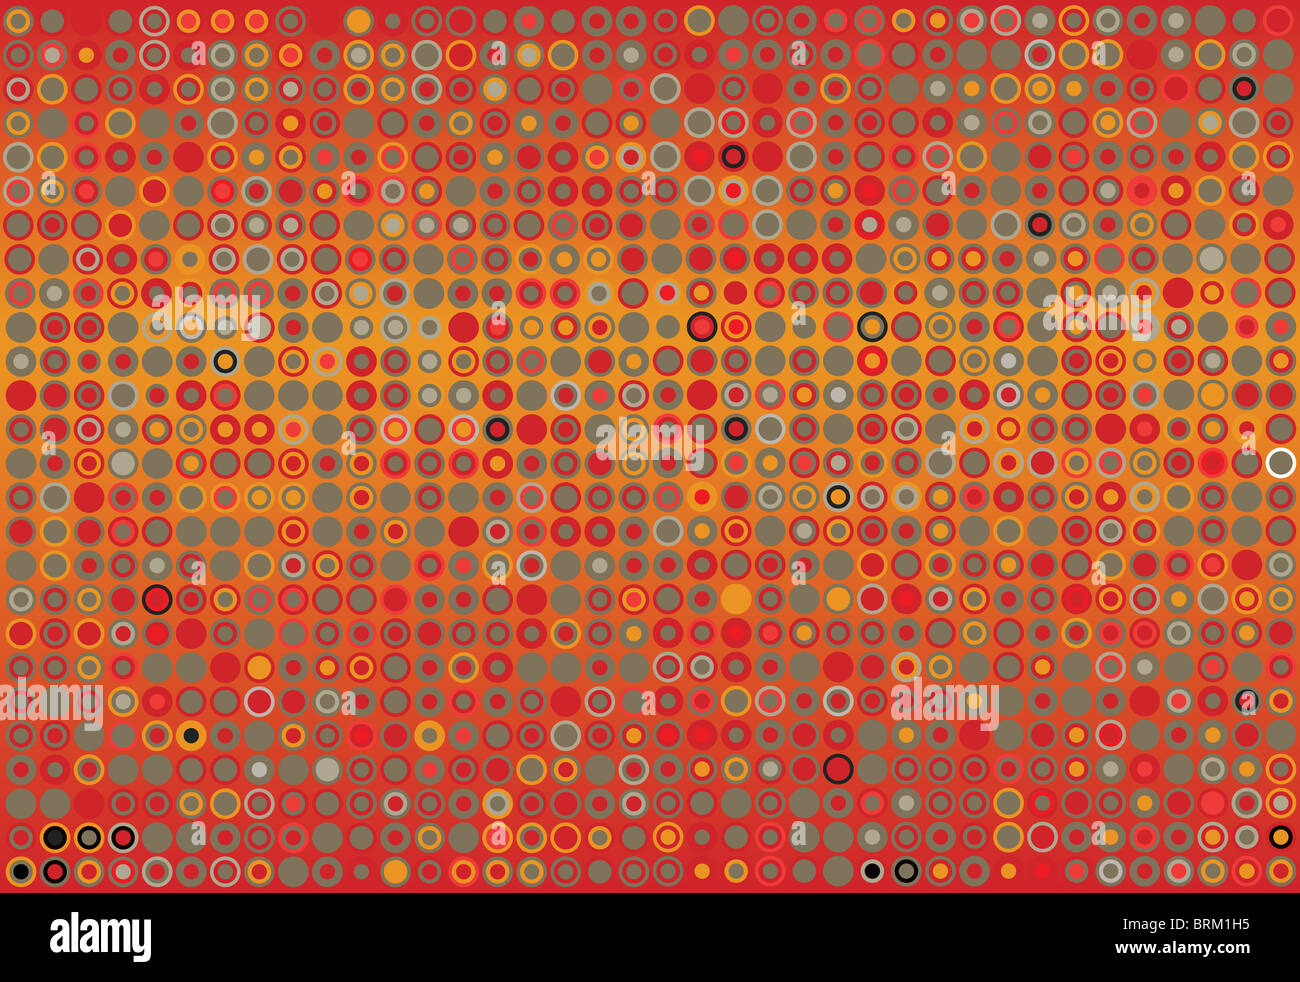 Abstract illustrated background of red dots Stock Photo